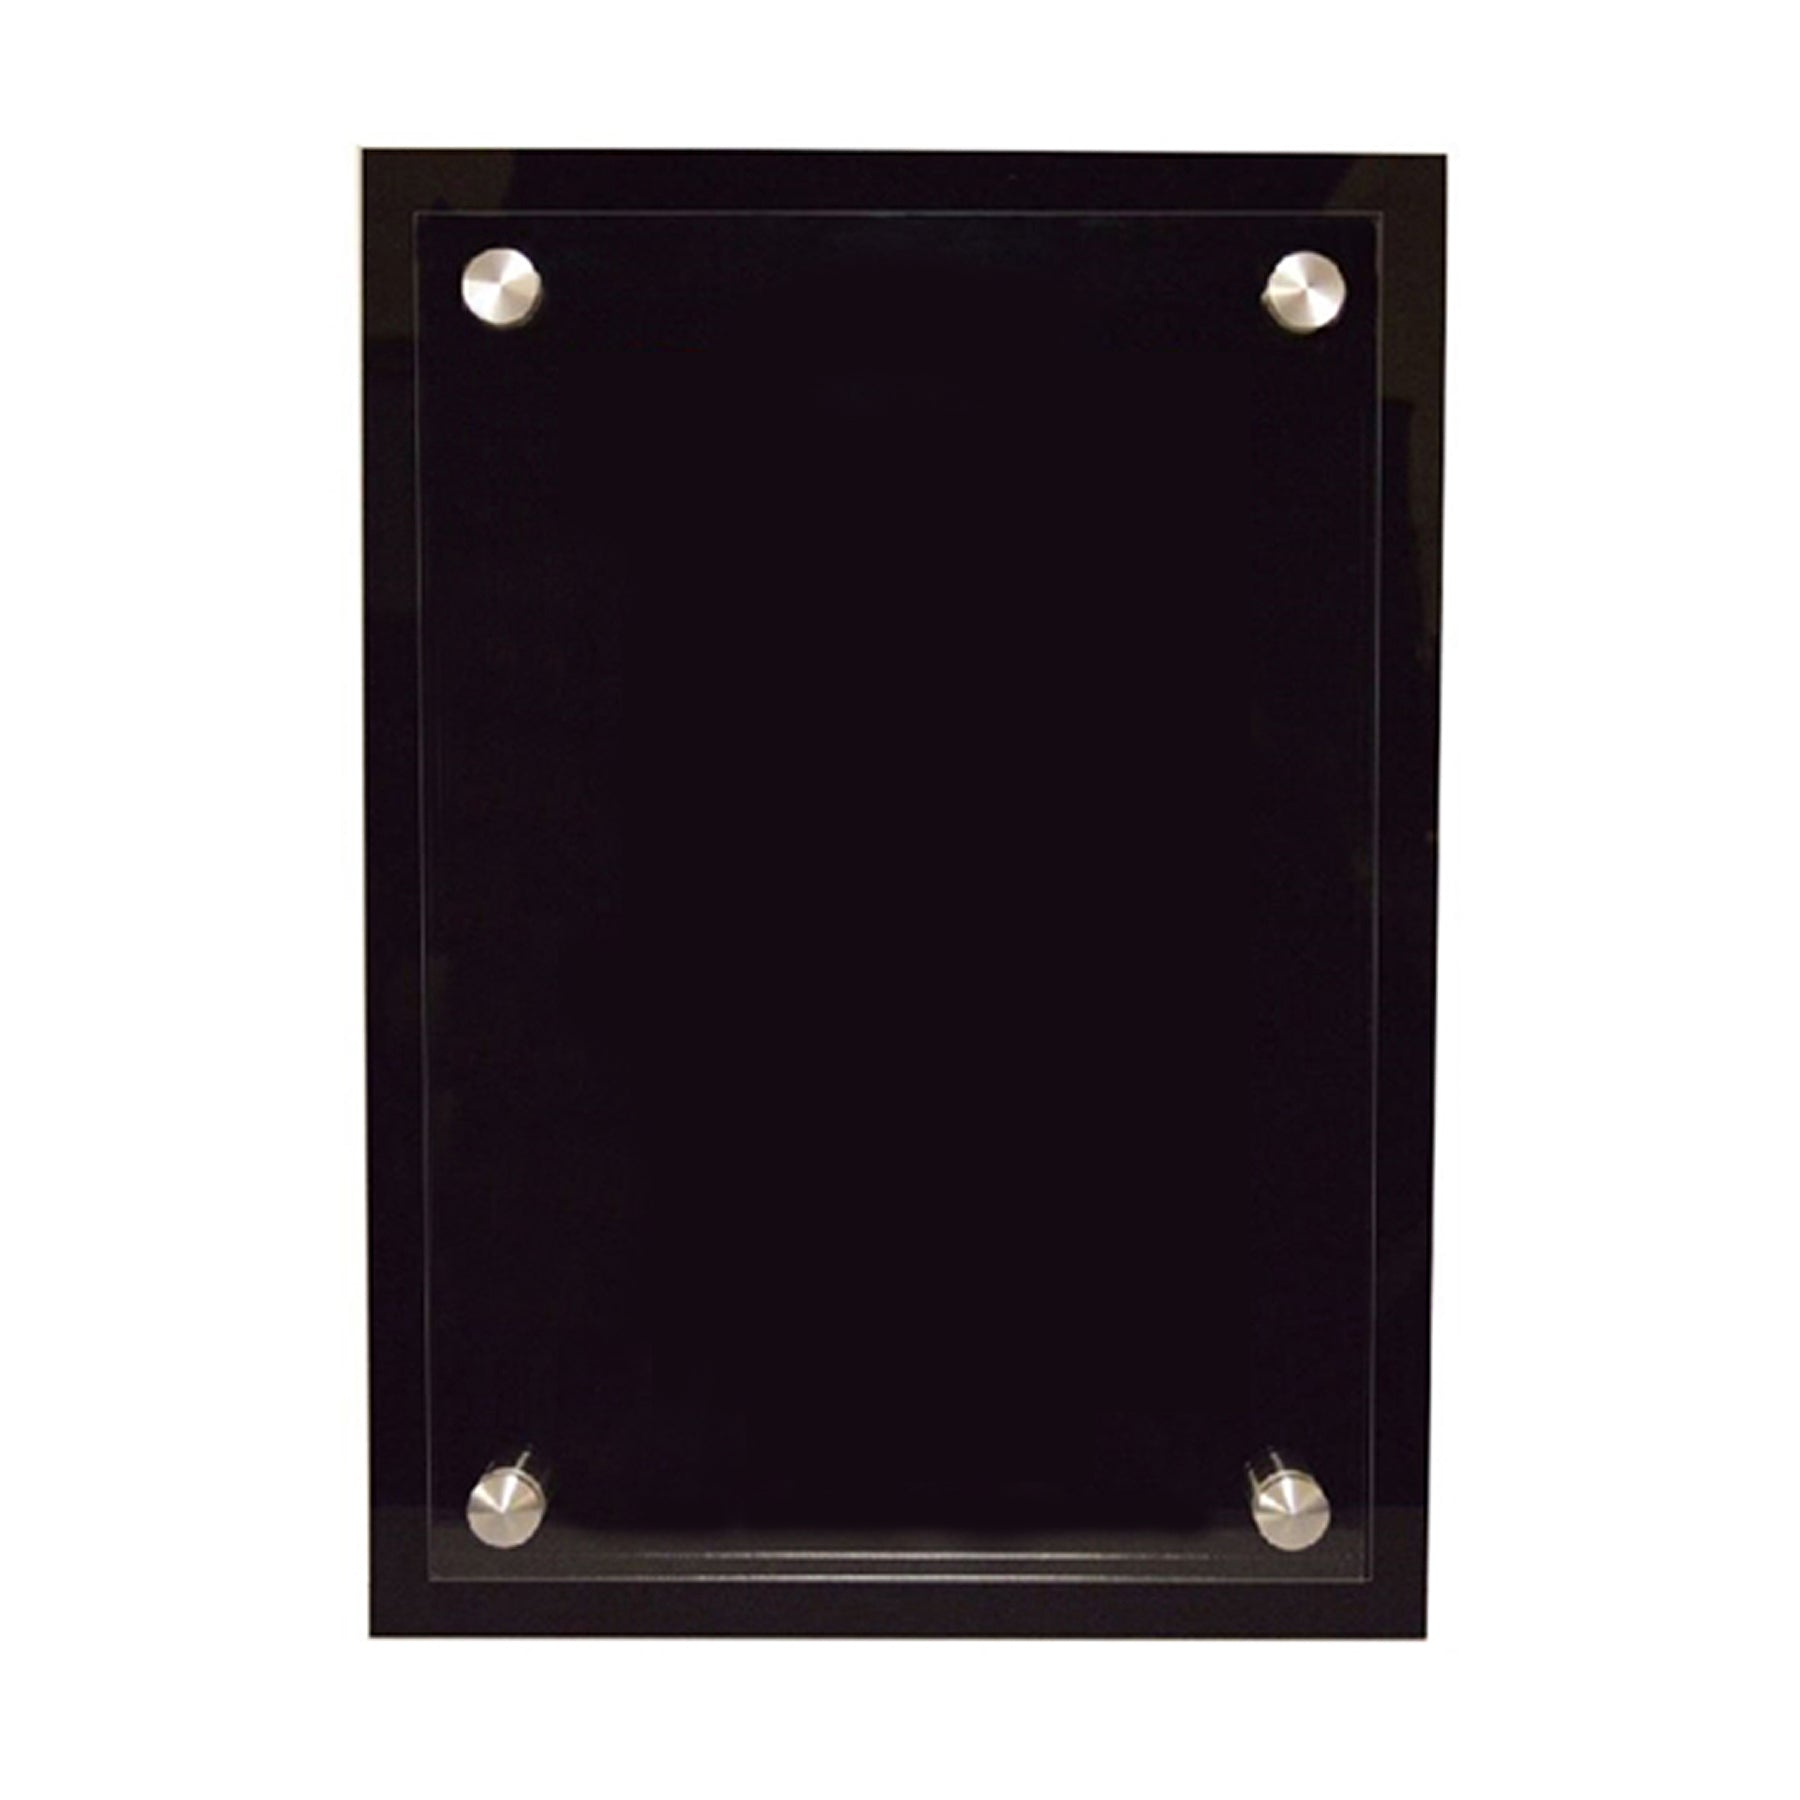 Black Acrylic Plaque with Full Color Clear Acrylic Floating Panel